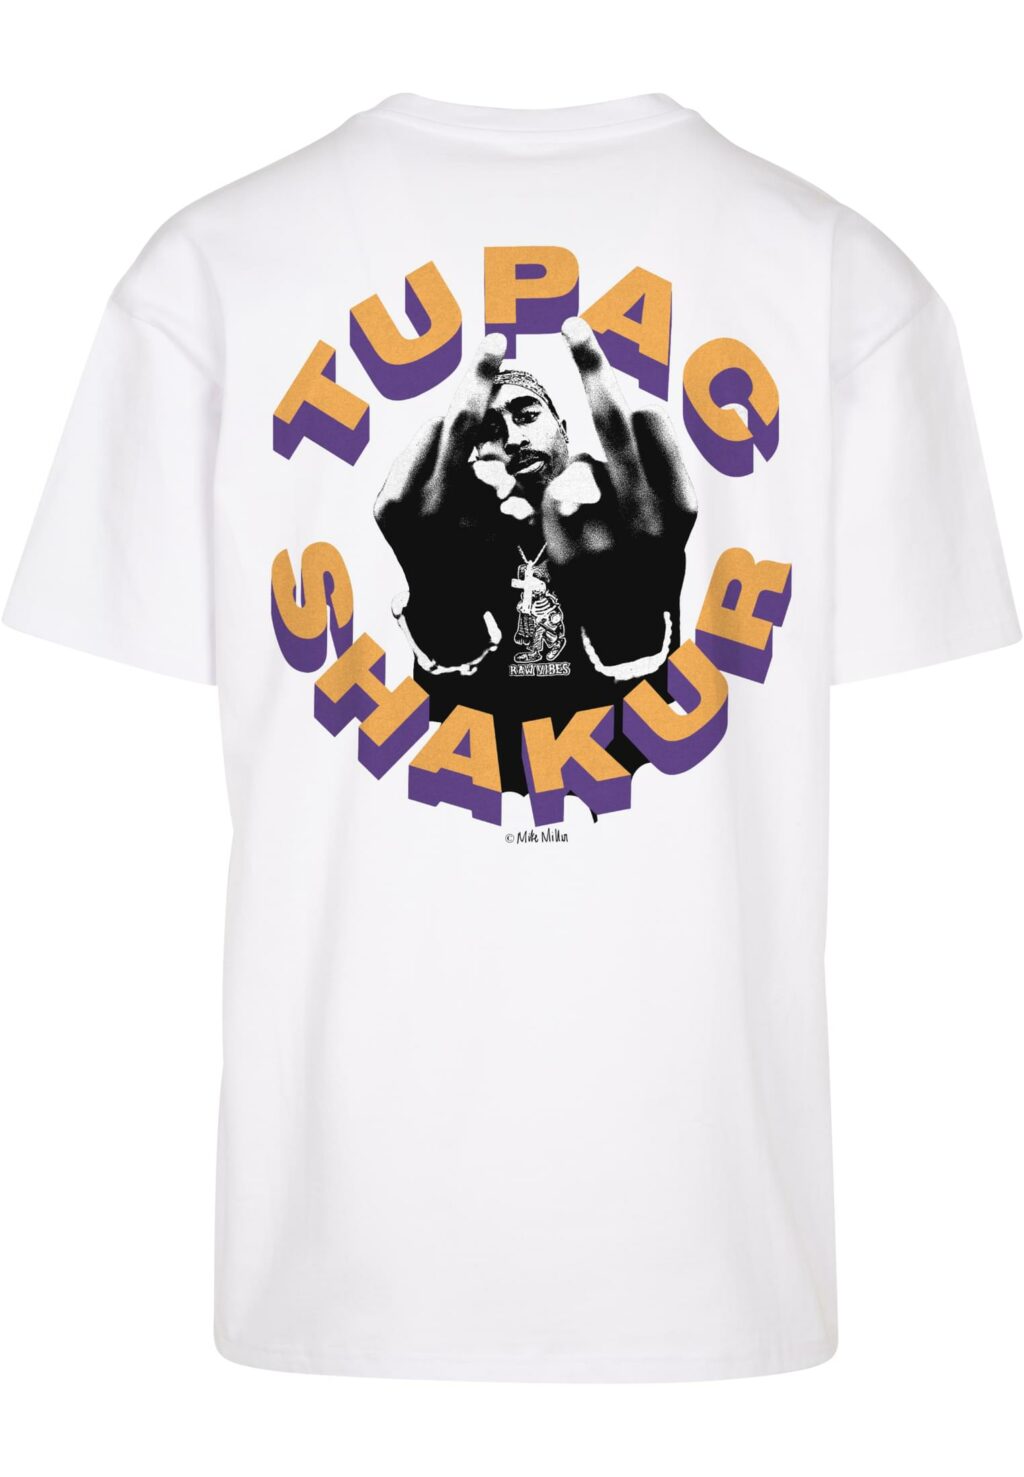 2Pac Toss it up Oversize Tee white MT2727